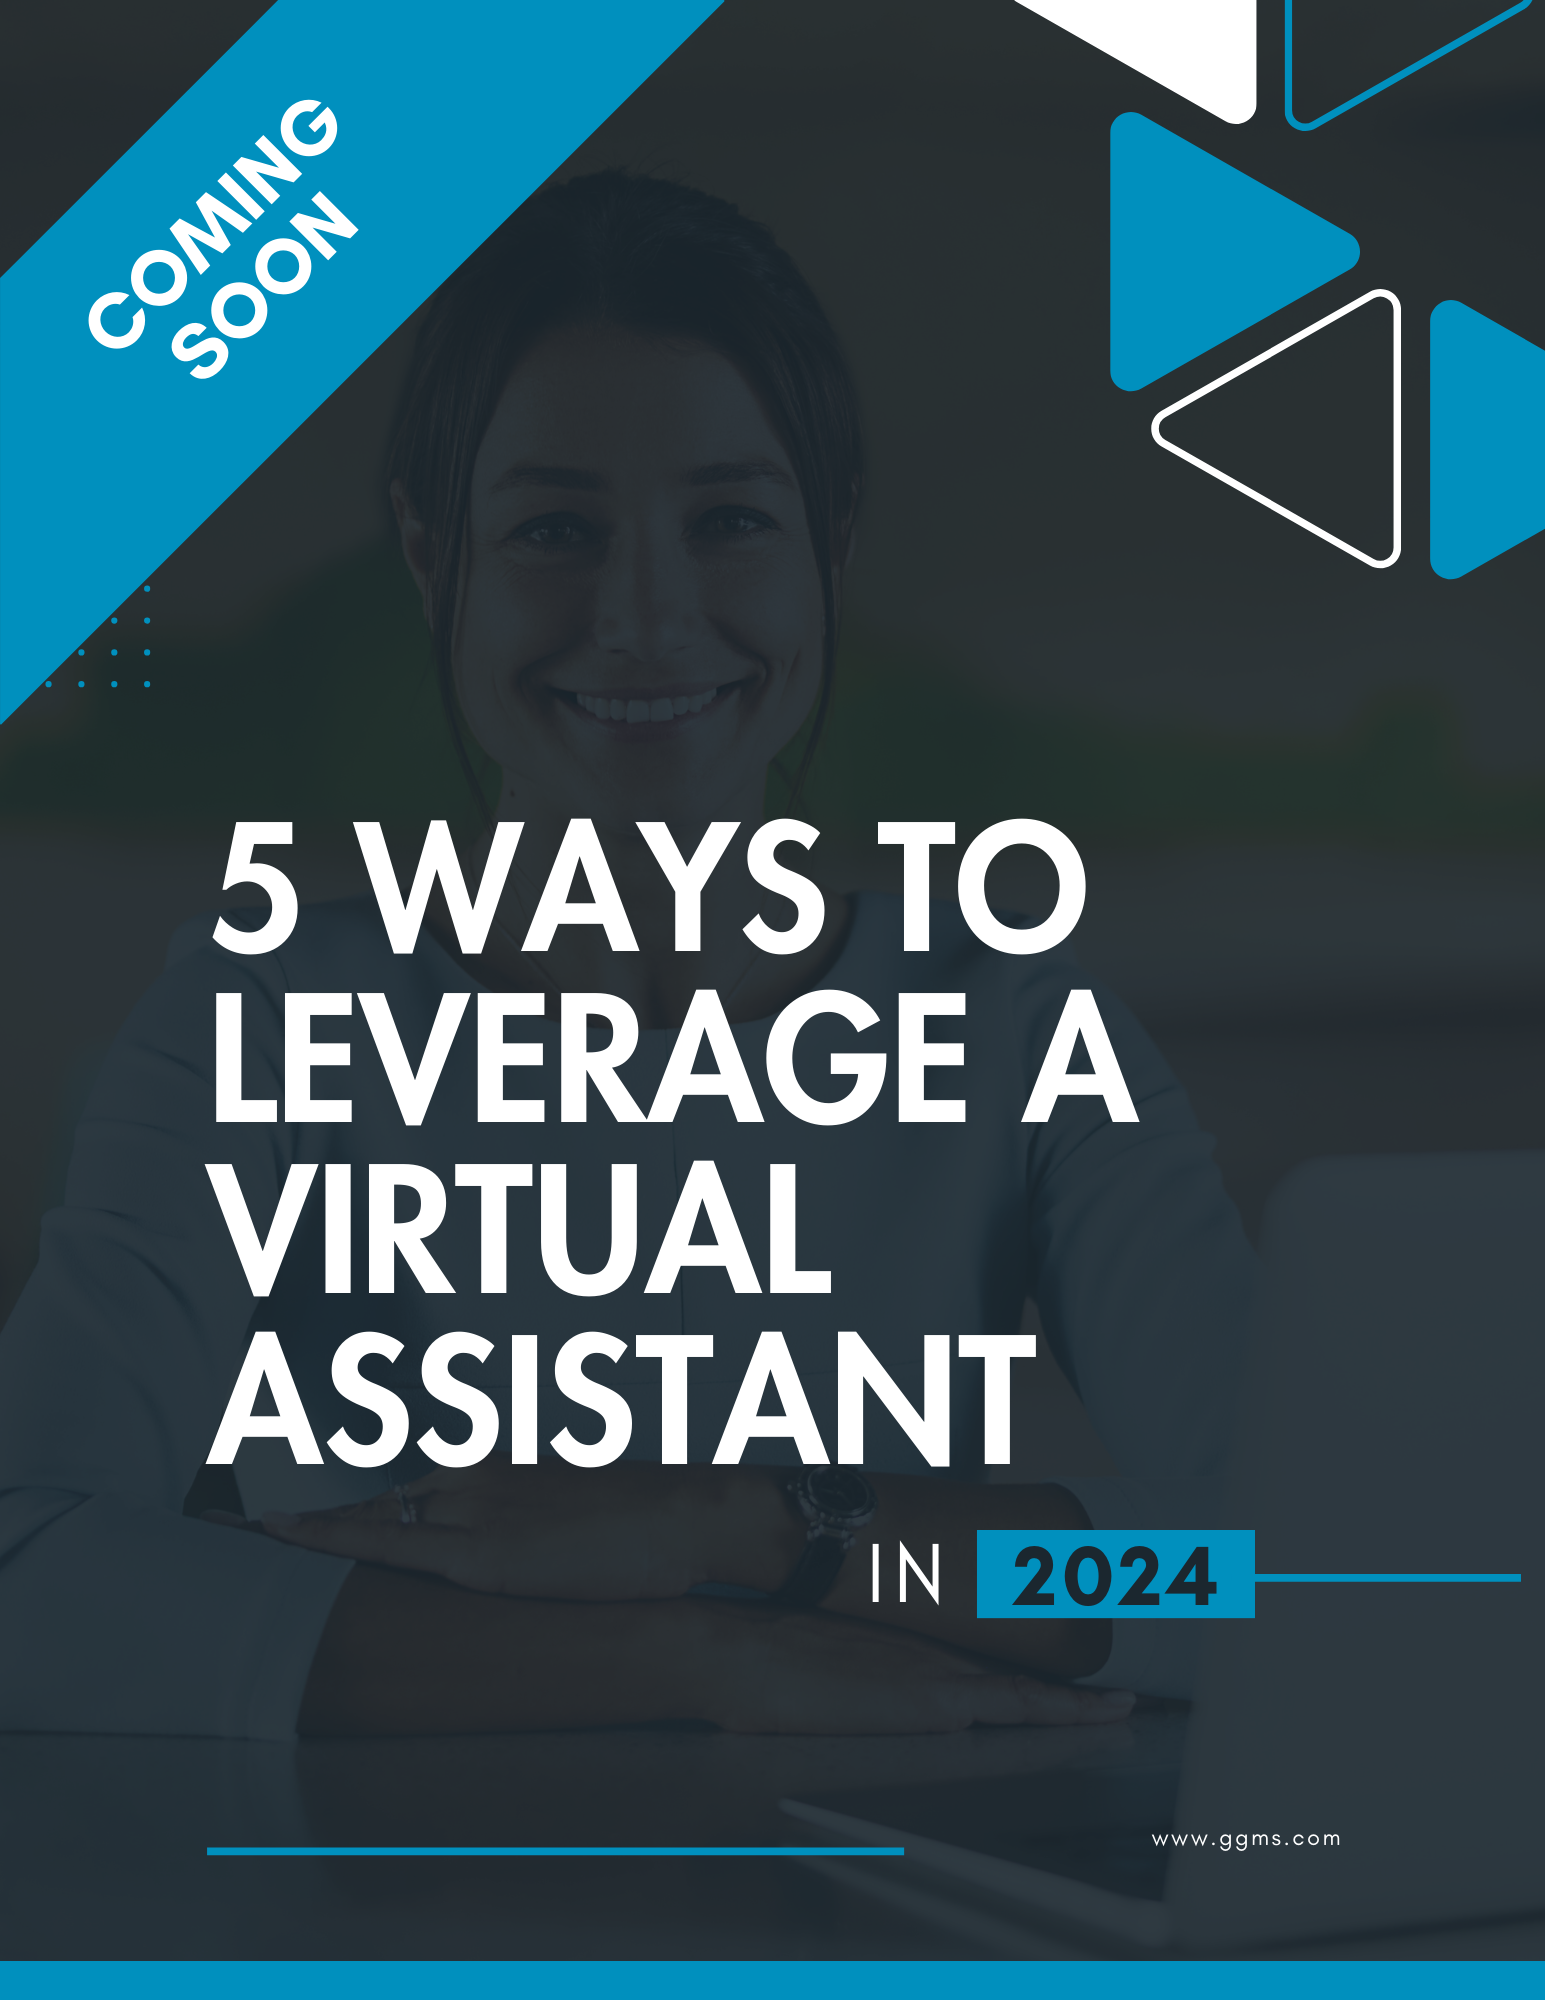 5 Ways to Leverage a Virtual Assistant